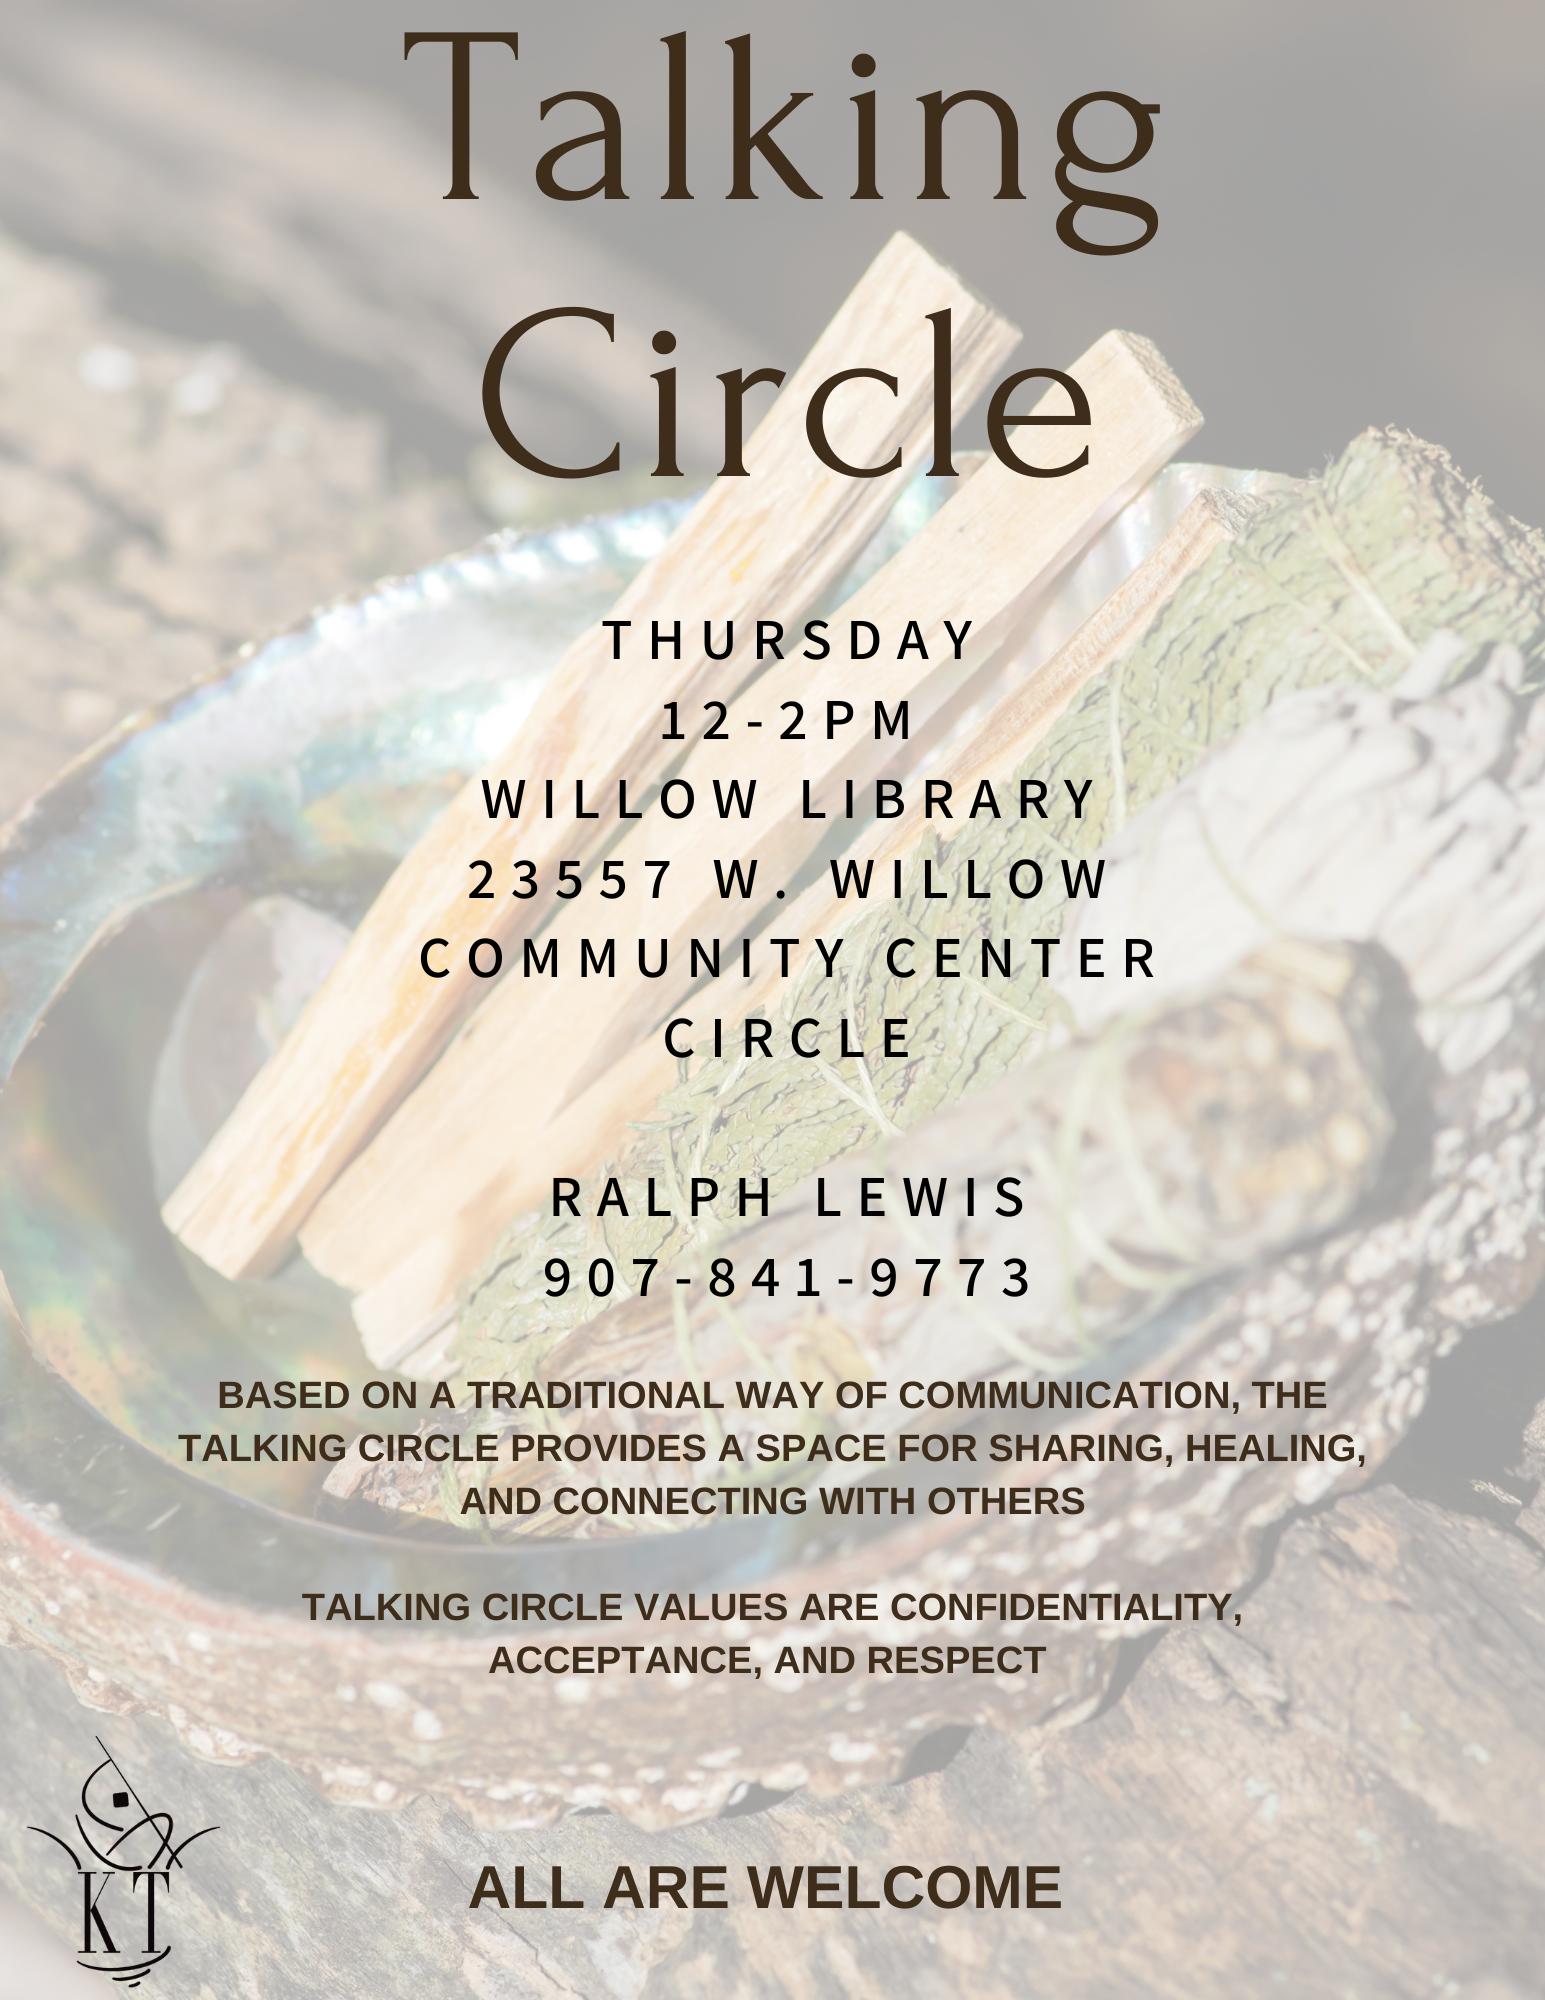 Flyer with info on weekly talking circle hosted by Knik Tribe.